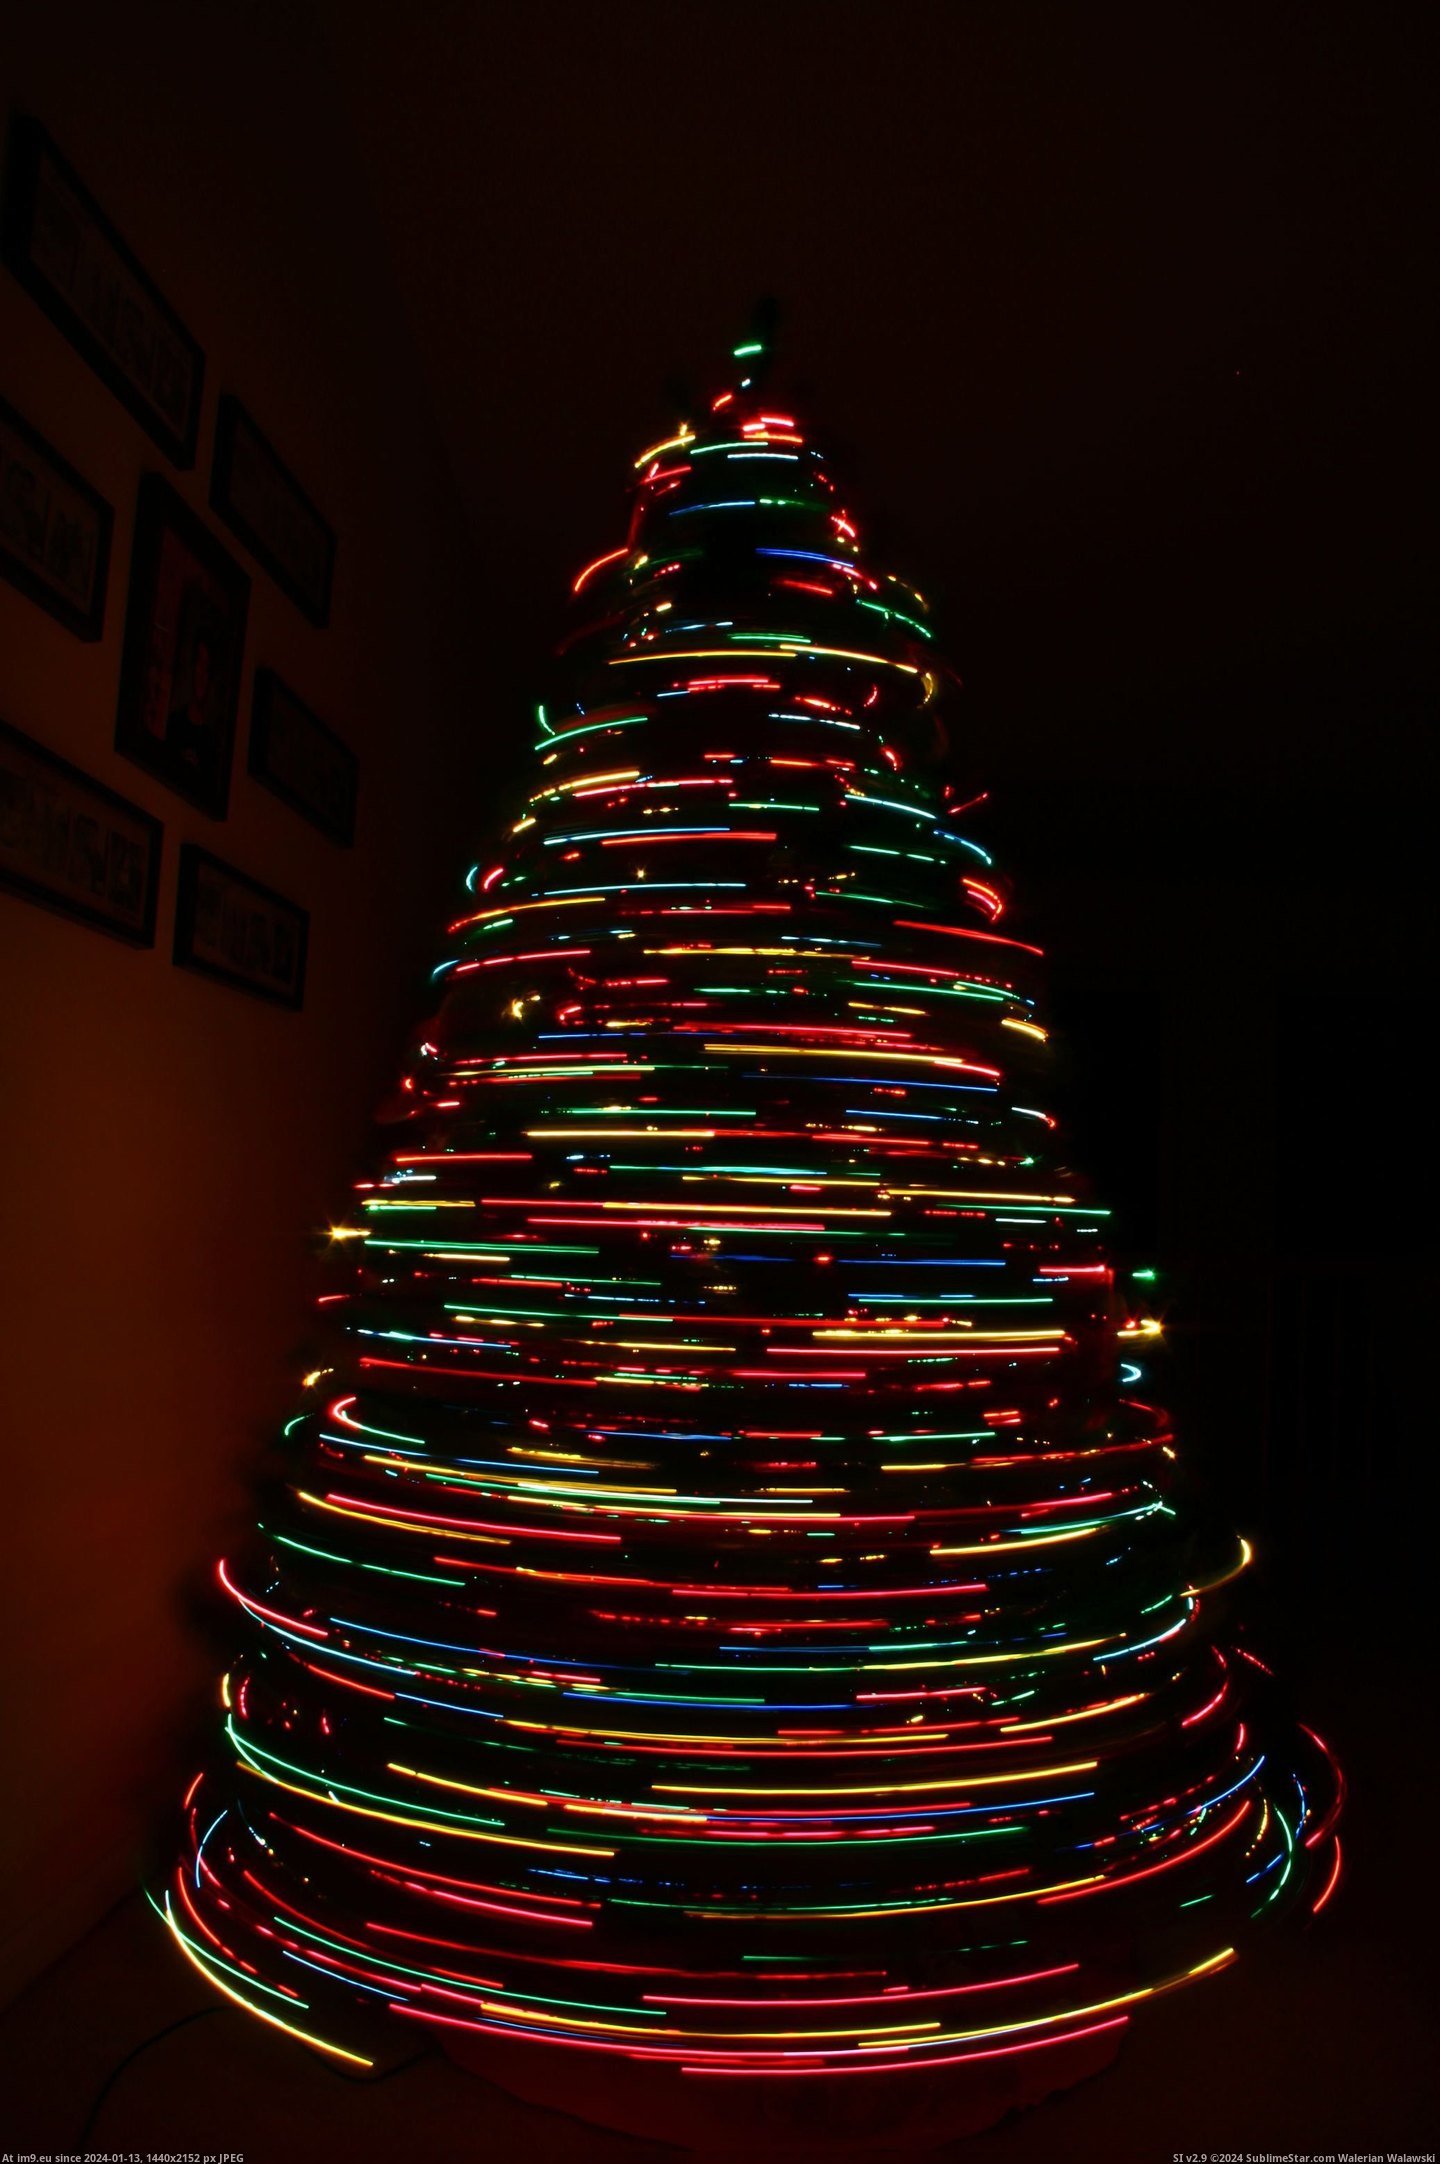 #Long #Christmas #Zoomed #Spinning #Tree #Exposure [Pics] Long exposure of my Christmas Tree spinning...and then I zoomed in 1 Pic. (Изображение из альбом My r/PICS favs))